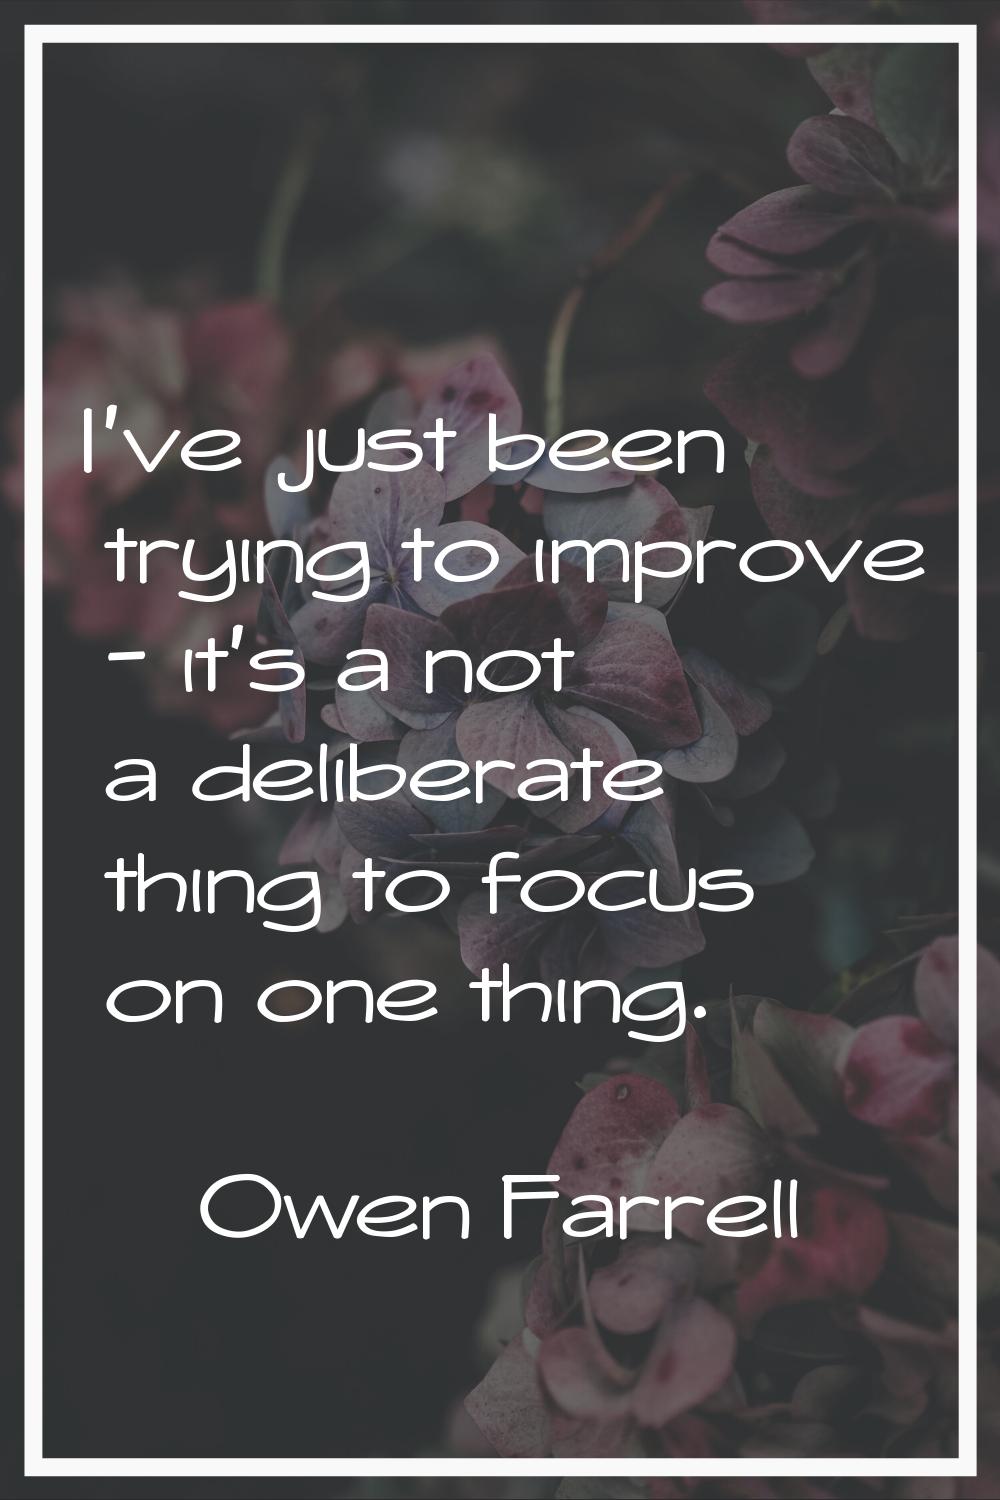 I've just been trying to improve - it's a not a deliberate thing to focus on one thing.